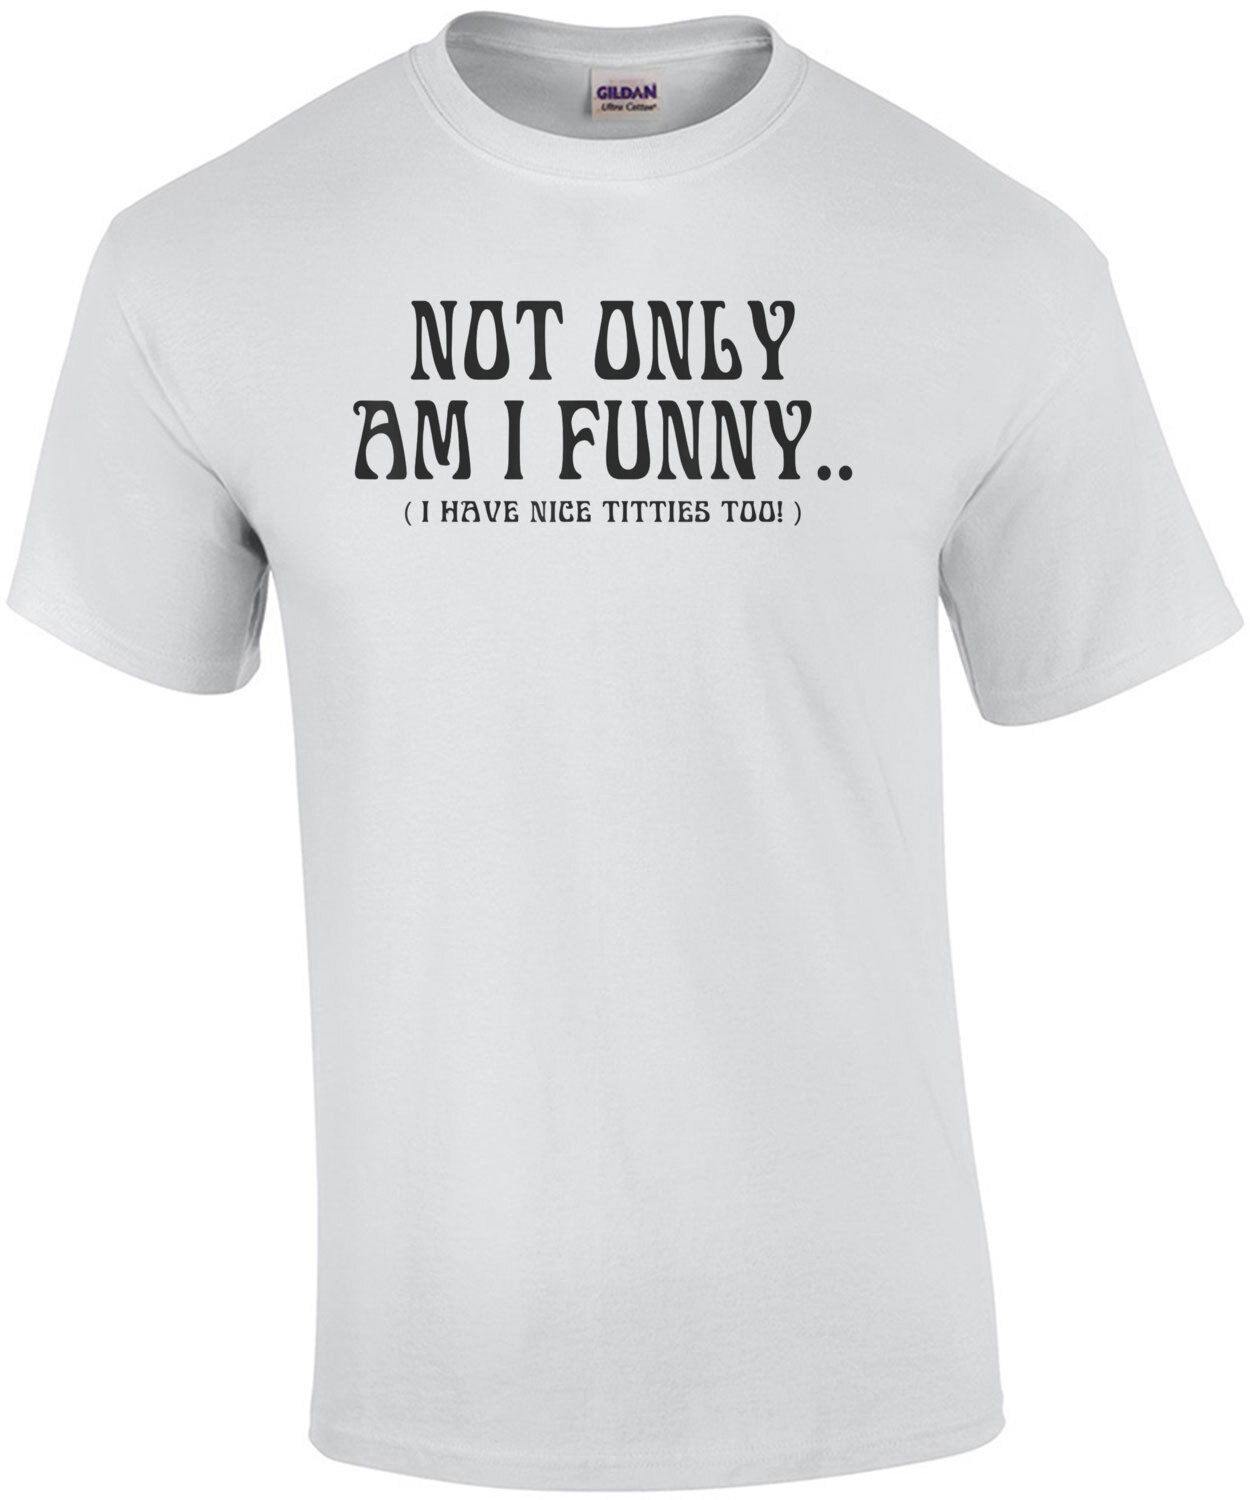 Not Only Am I funny, I have Nice Titties Too Funny Shirt